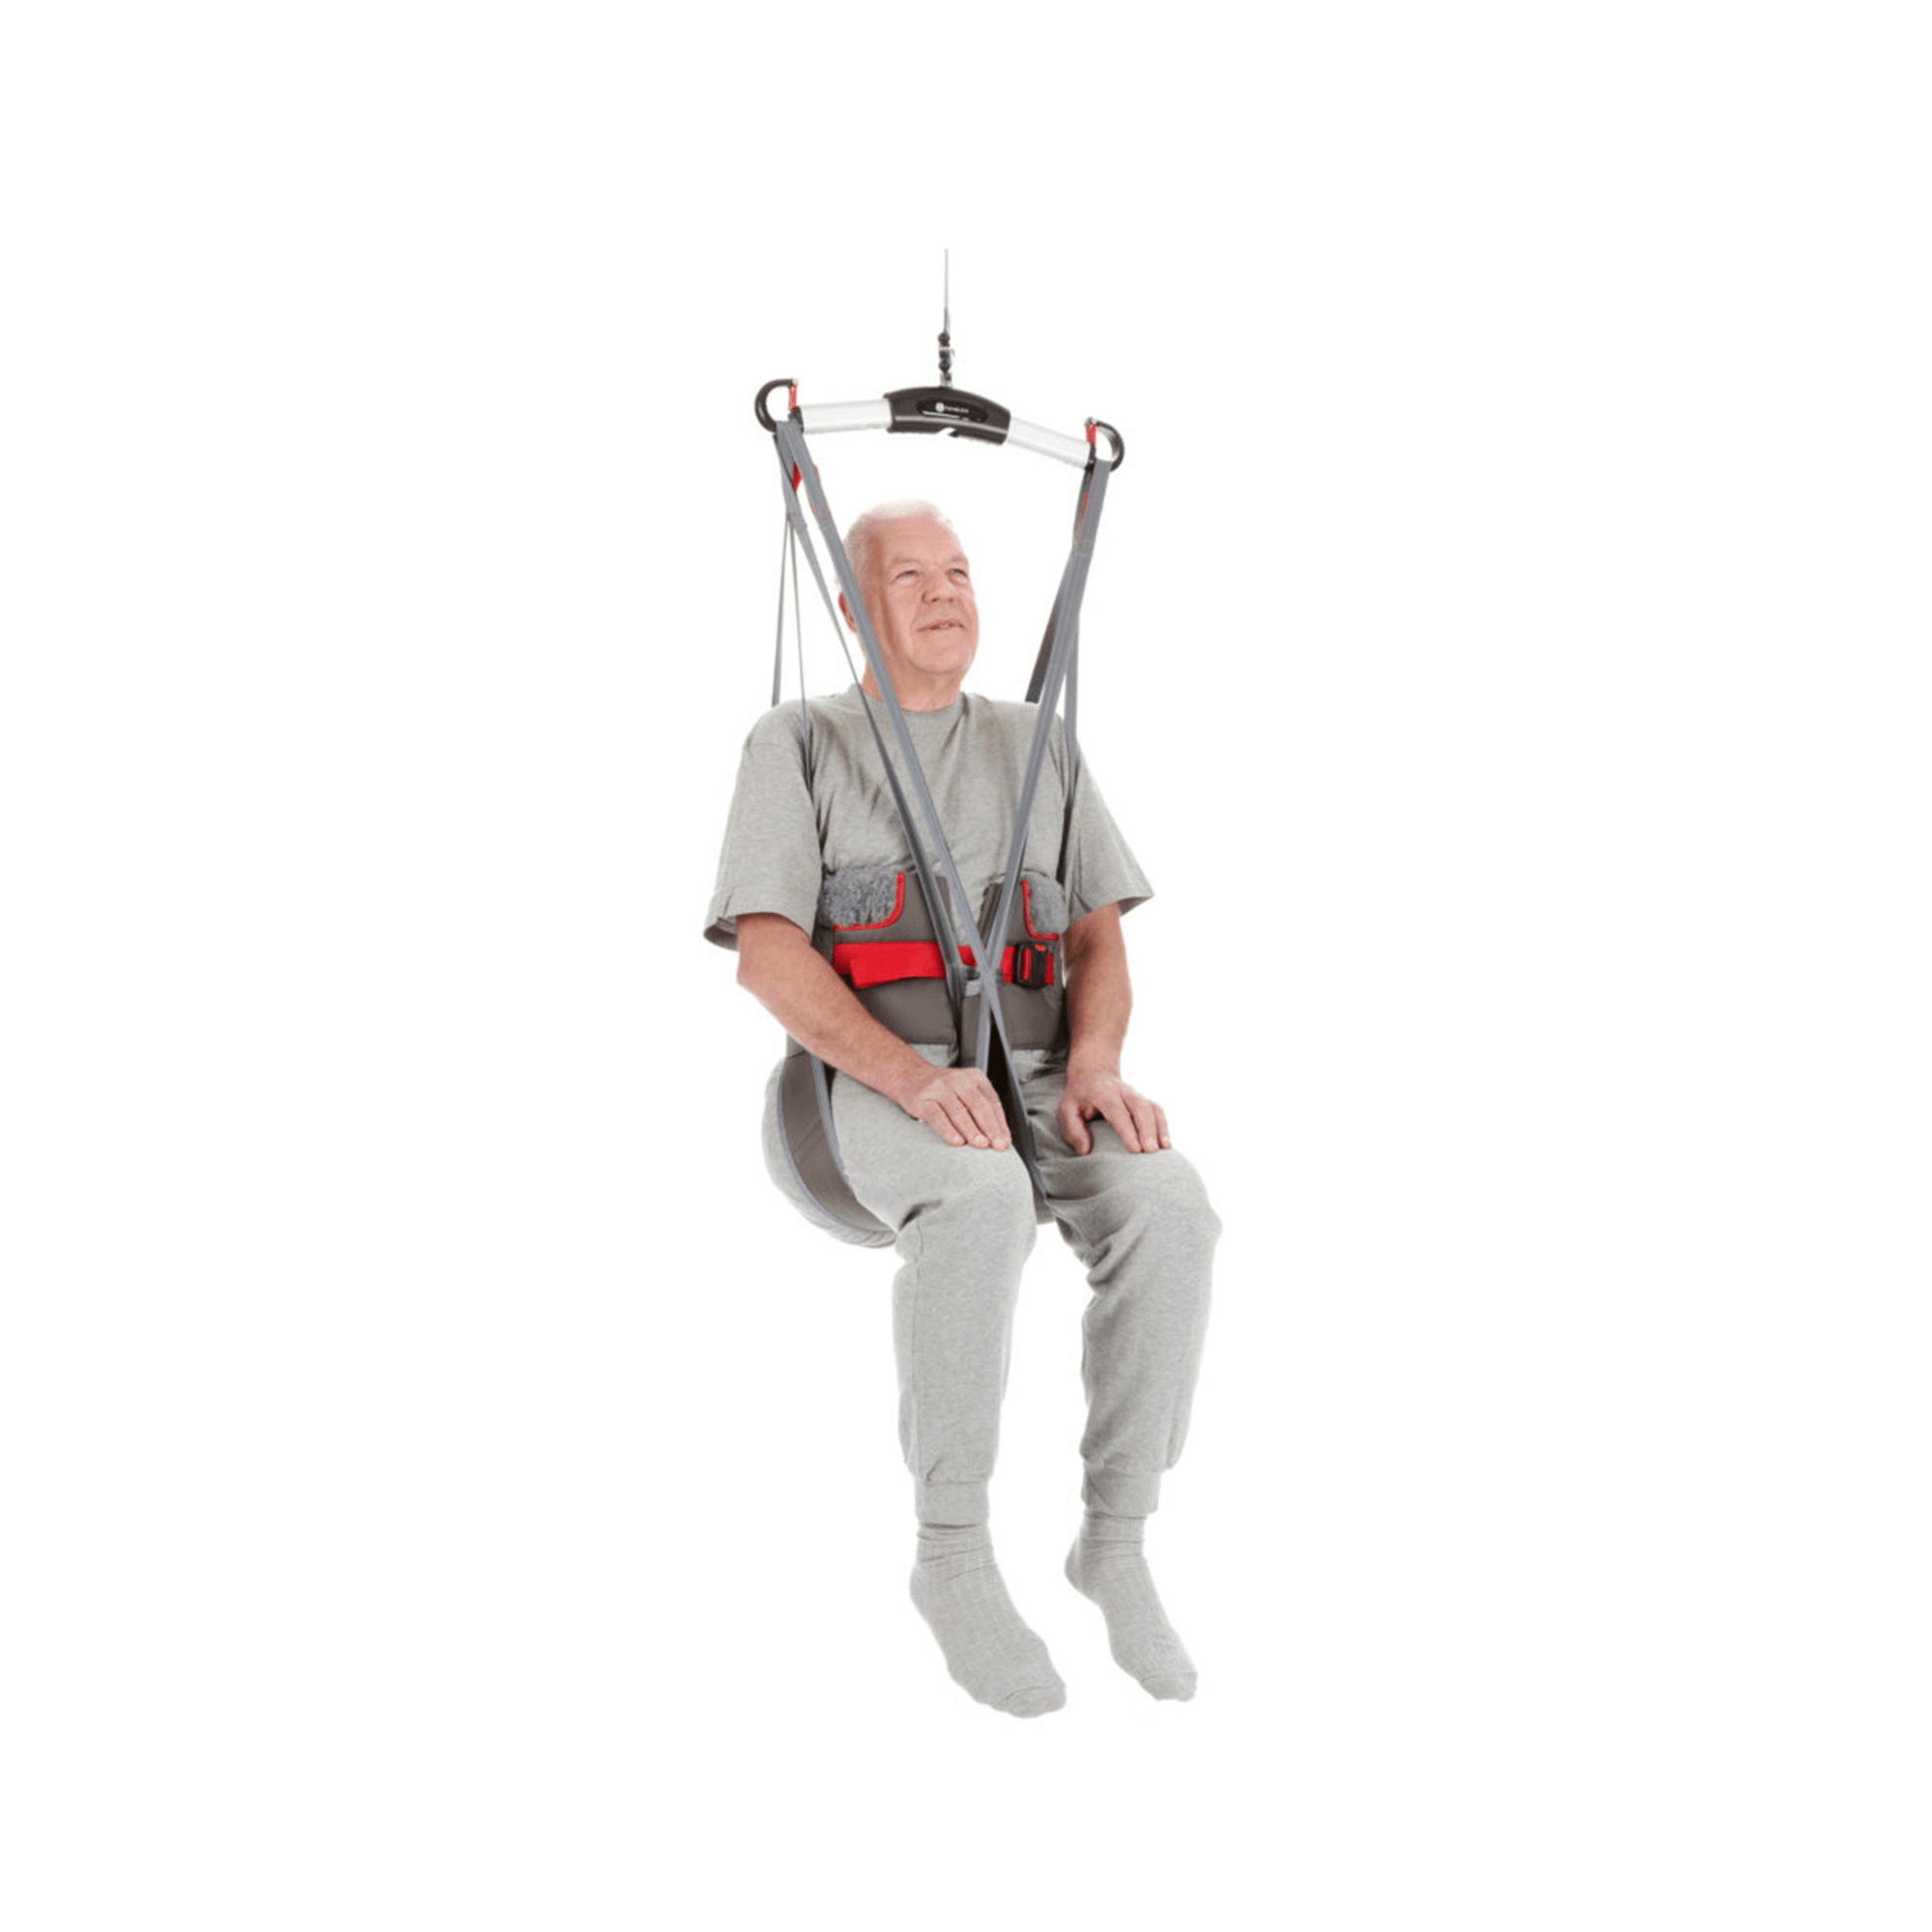 Toileting Sling - Hygiene - Universal Patient Lift Sling for Lifts for Home Use - Transfer Safely with Patient Lifter - Compatible with Hoyer Lift - Easy-to-Use